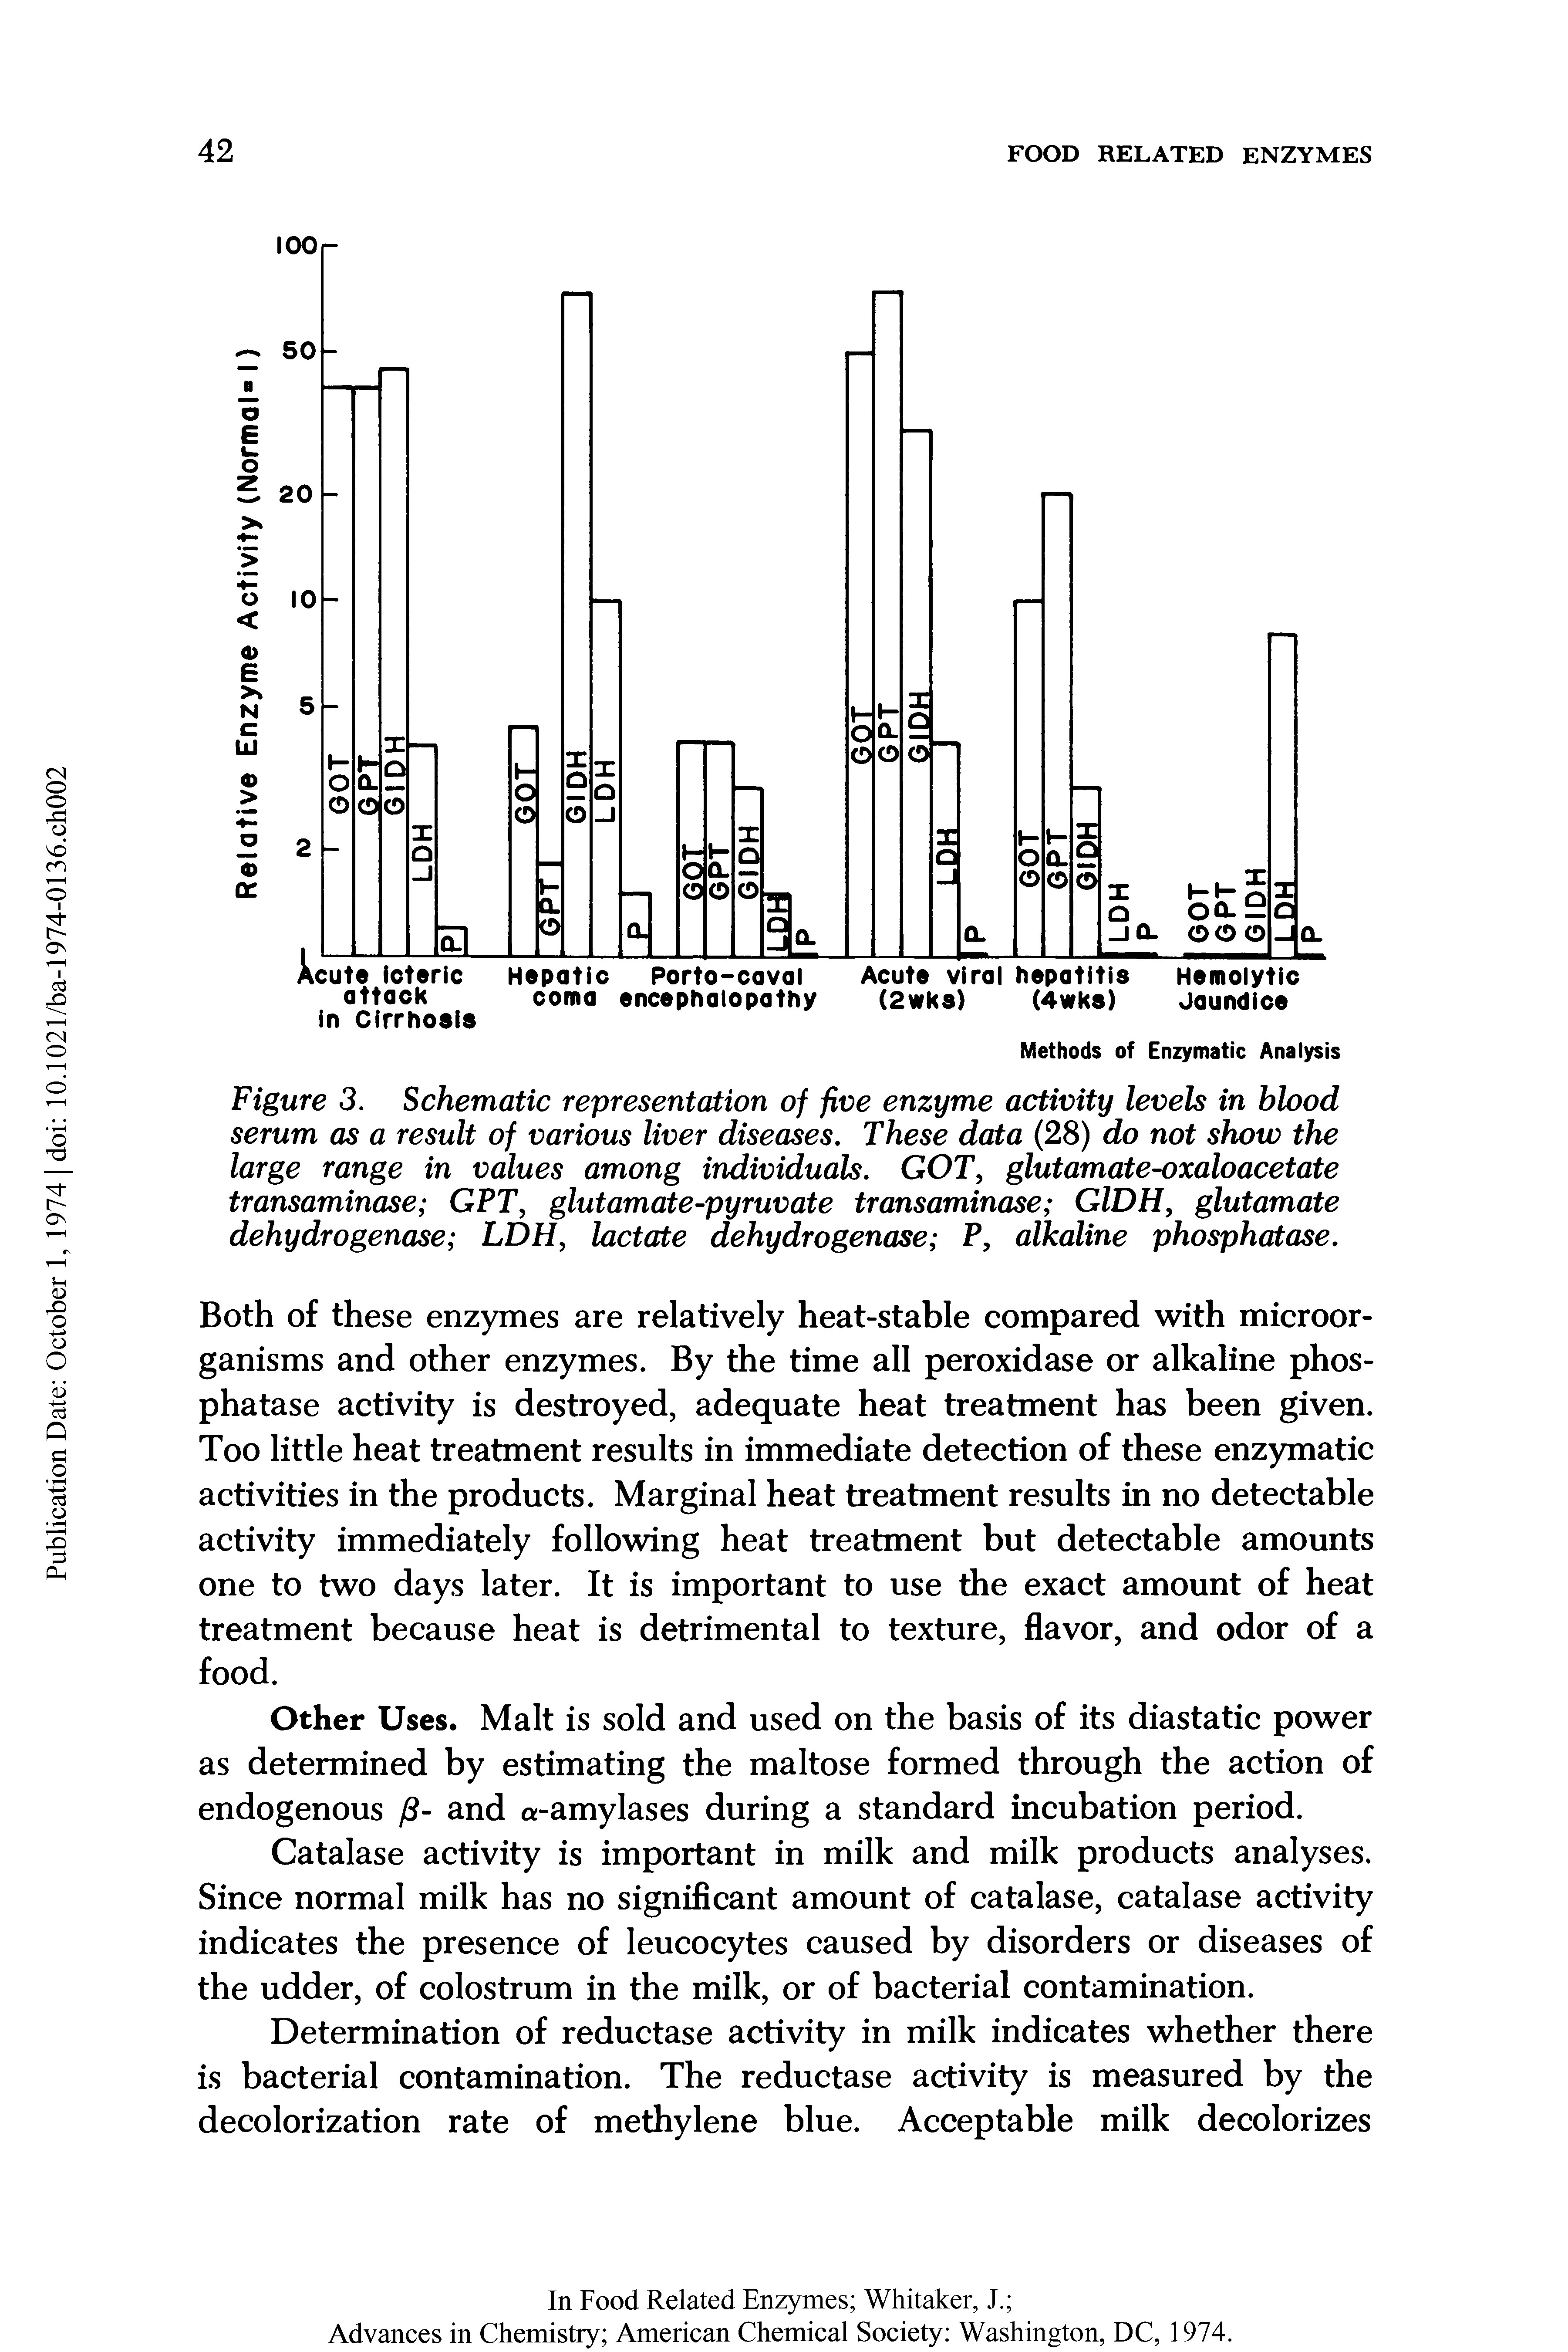 Figure 3. Schematic representation of five enzyme activity levels in blood serum as a result of various liver diseases. These data (28) do not show the large range in values among individuals. GOT, glutamate-oxaloacetate transaminase GPT, glutamate-pyruvate transaminase GlDH, glutamate dehydrogenase LDH, lactate dehydrogenase P, alkaline phosphatase.